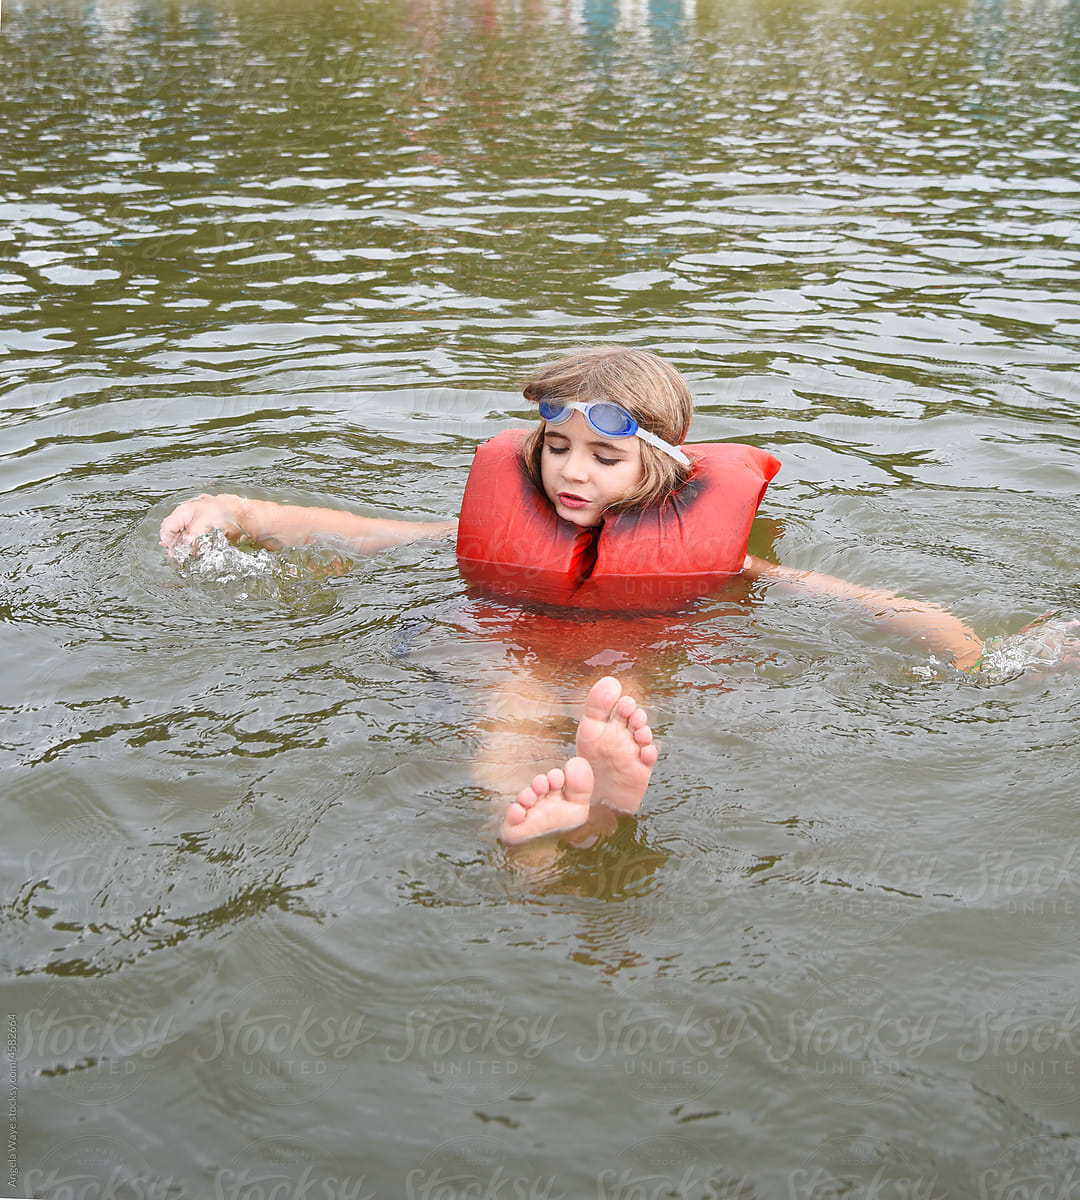 Child in Lake with Life jacket